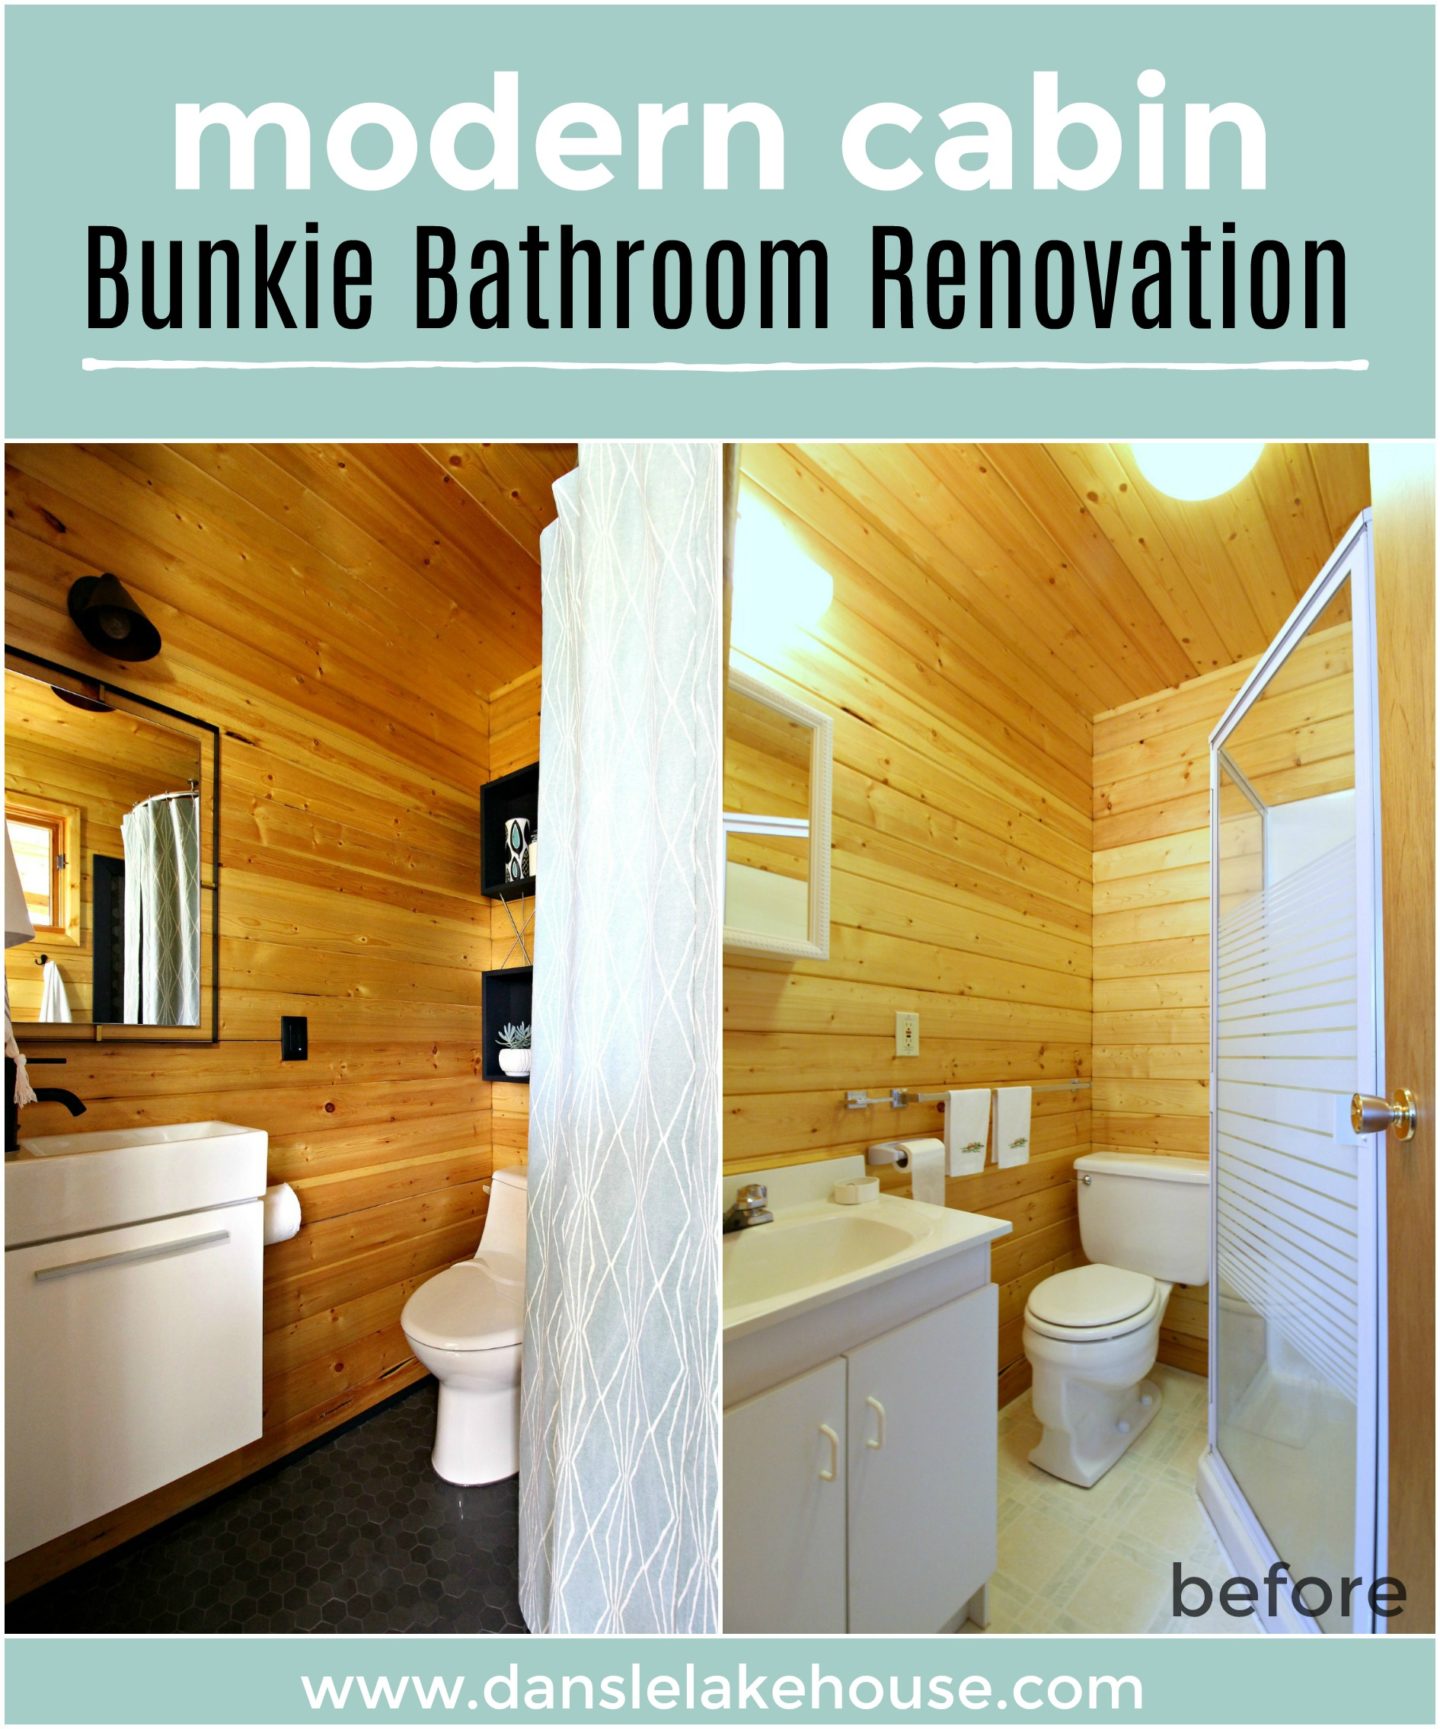 Modern Cabin Bunkie Bathroom Renovation with Stock Tank Shower and Pine Walls